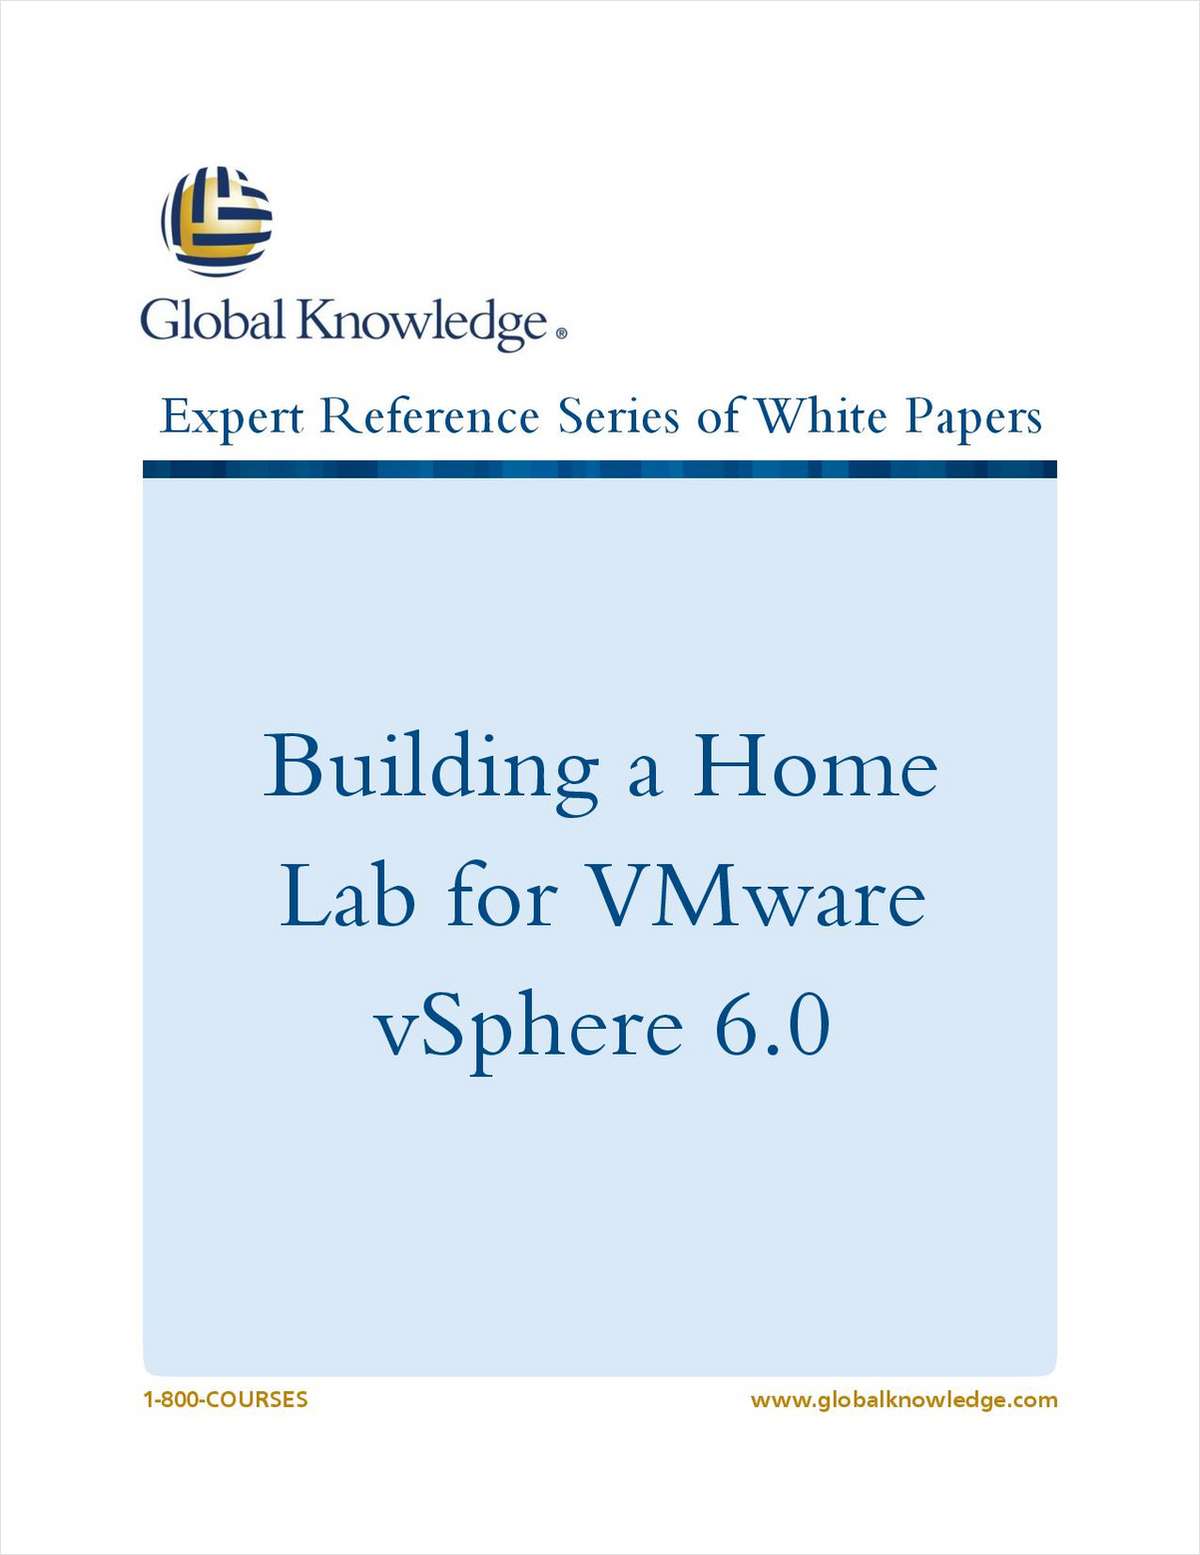 Building a Home Lab for VMware vSphere 6.0